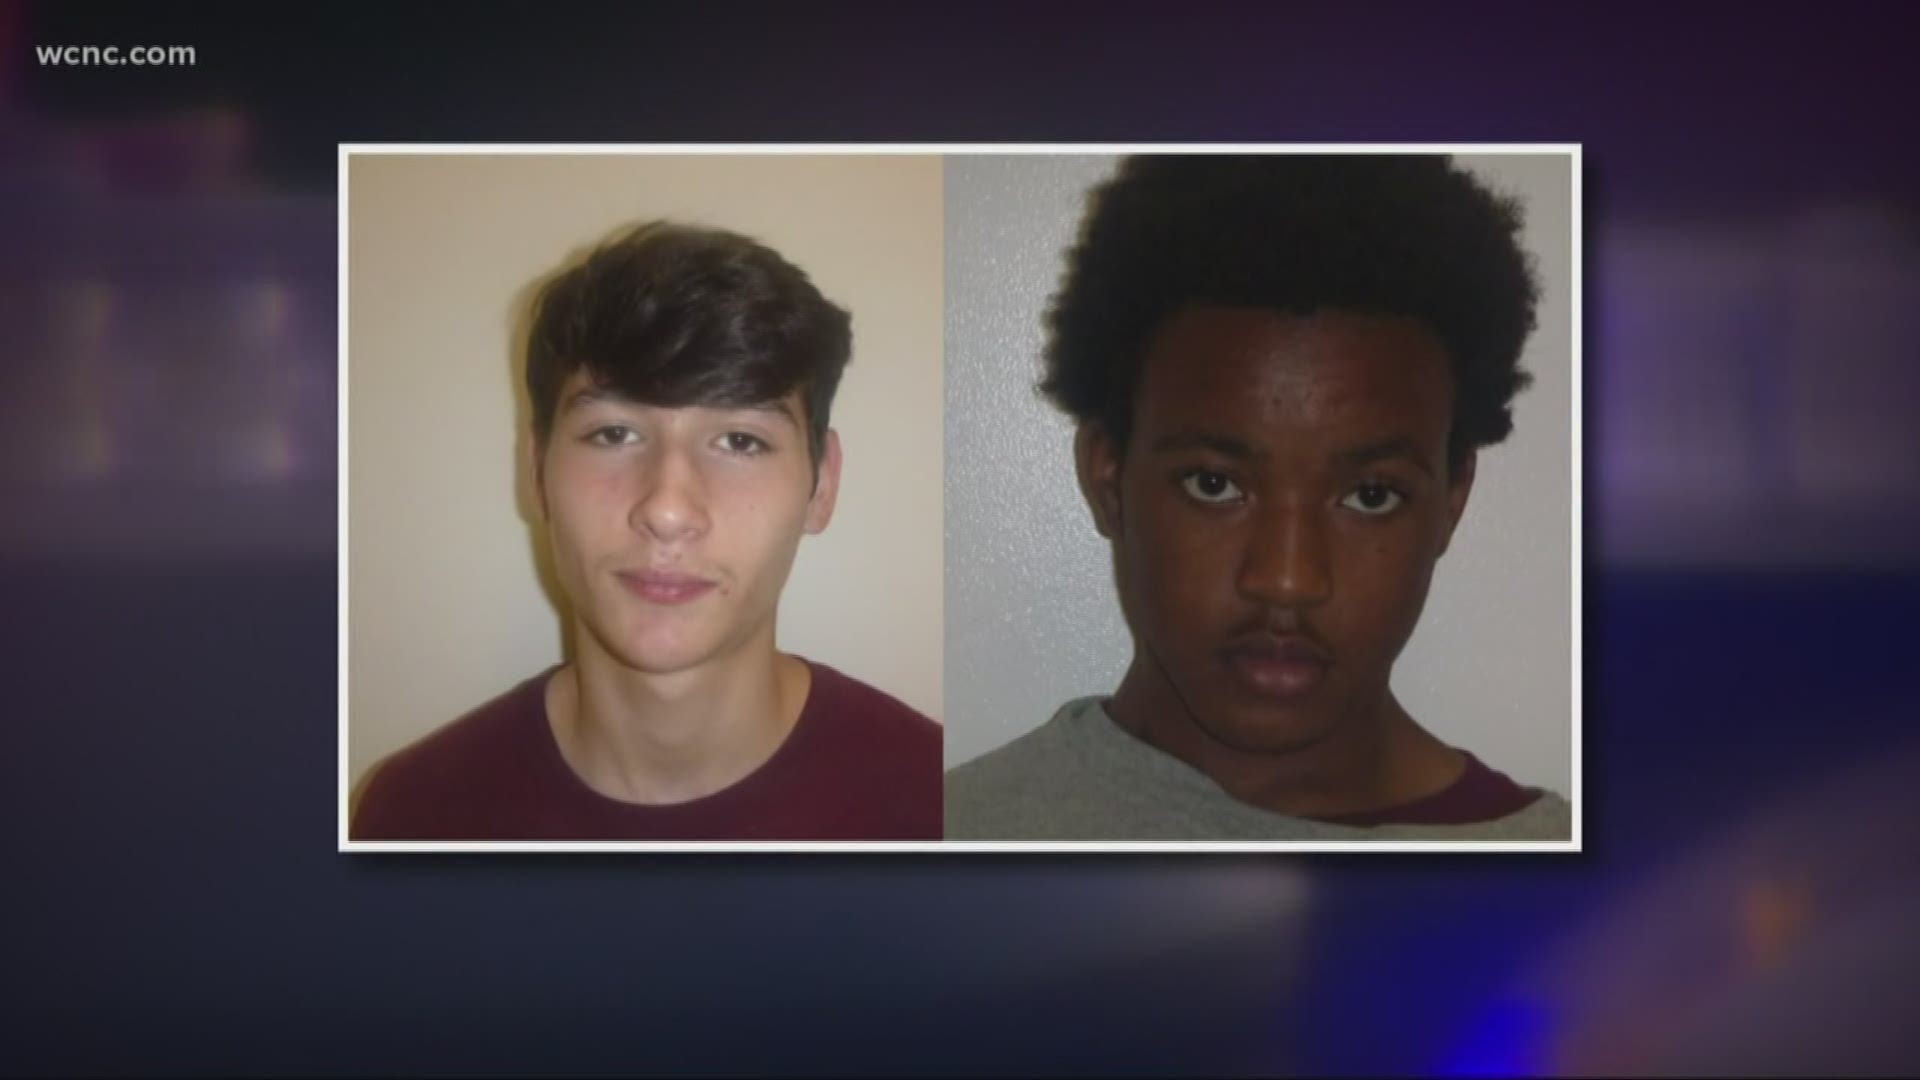 The teens escaped a youth development center in Concord on Sunday. Now, authorities say they could be in the Hickory area.